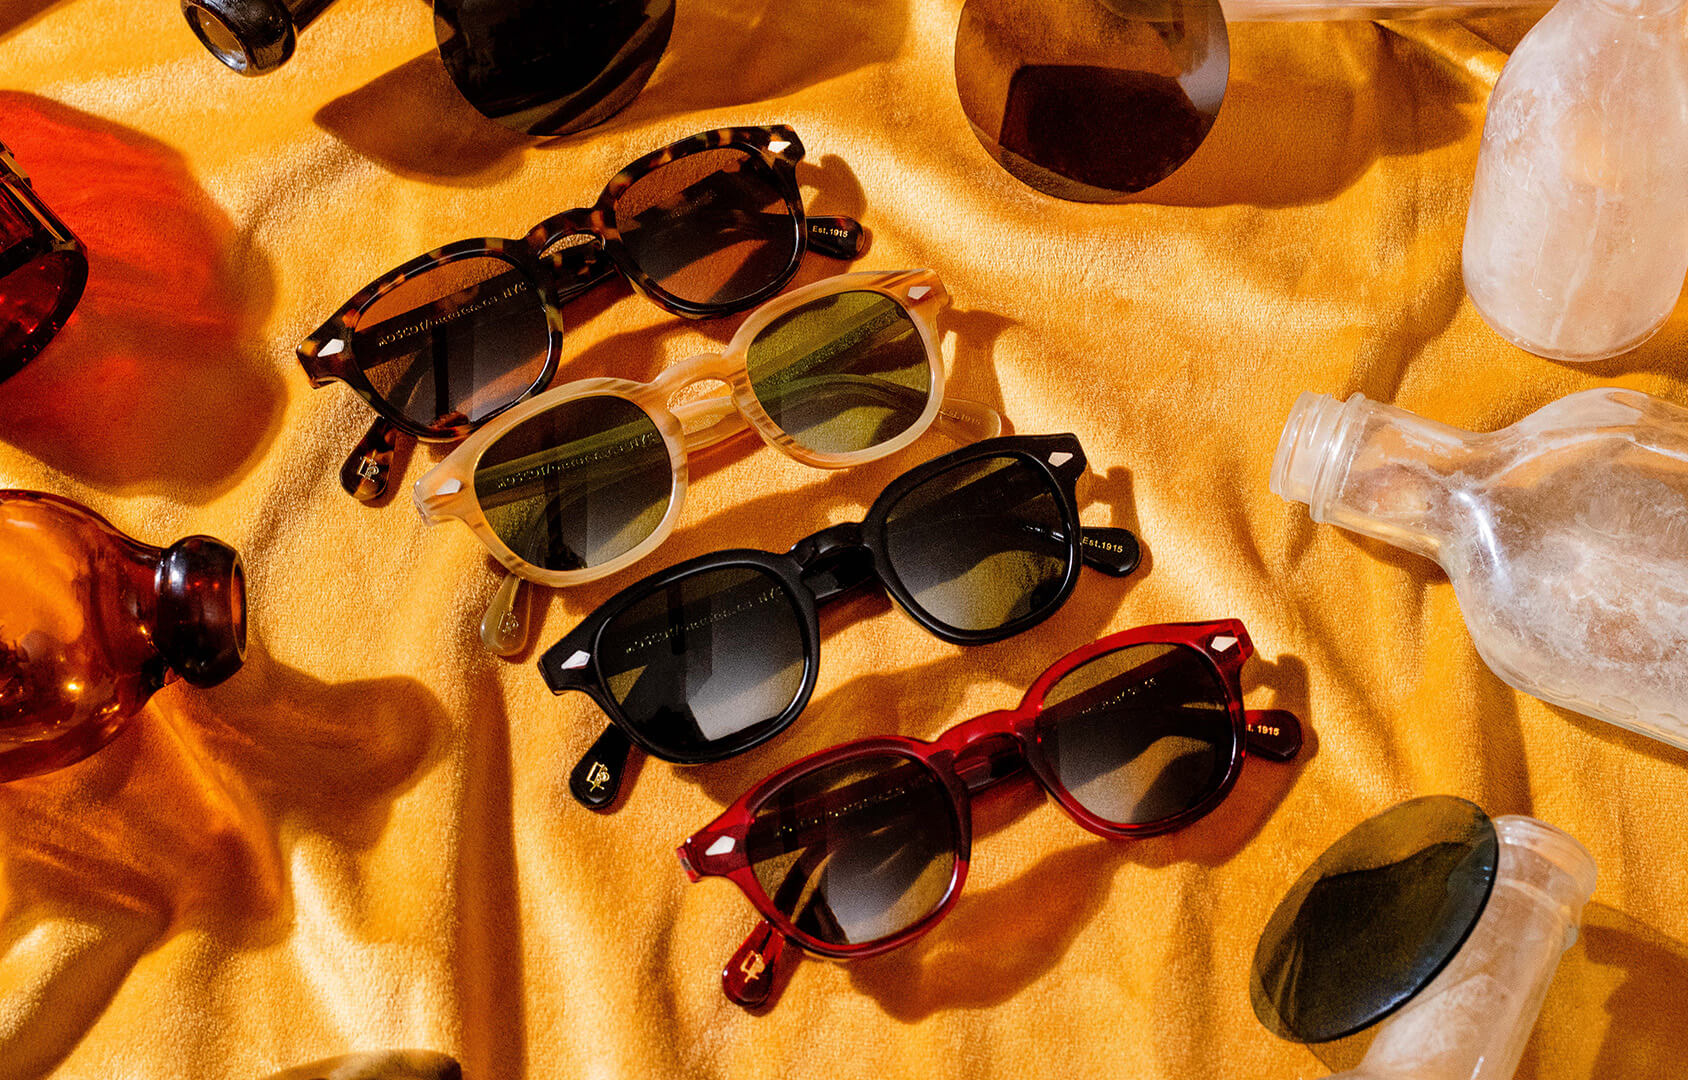 How to choose the best sunglasses for your face